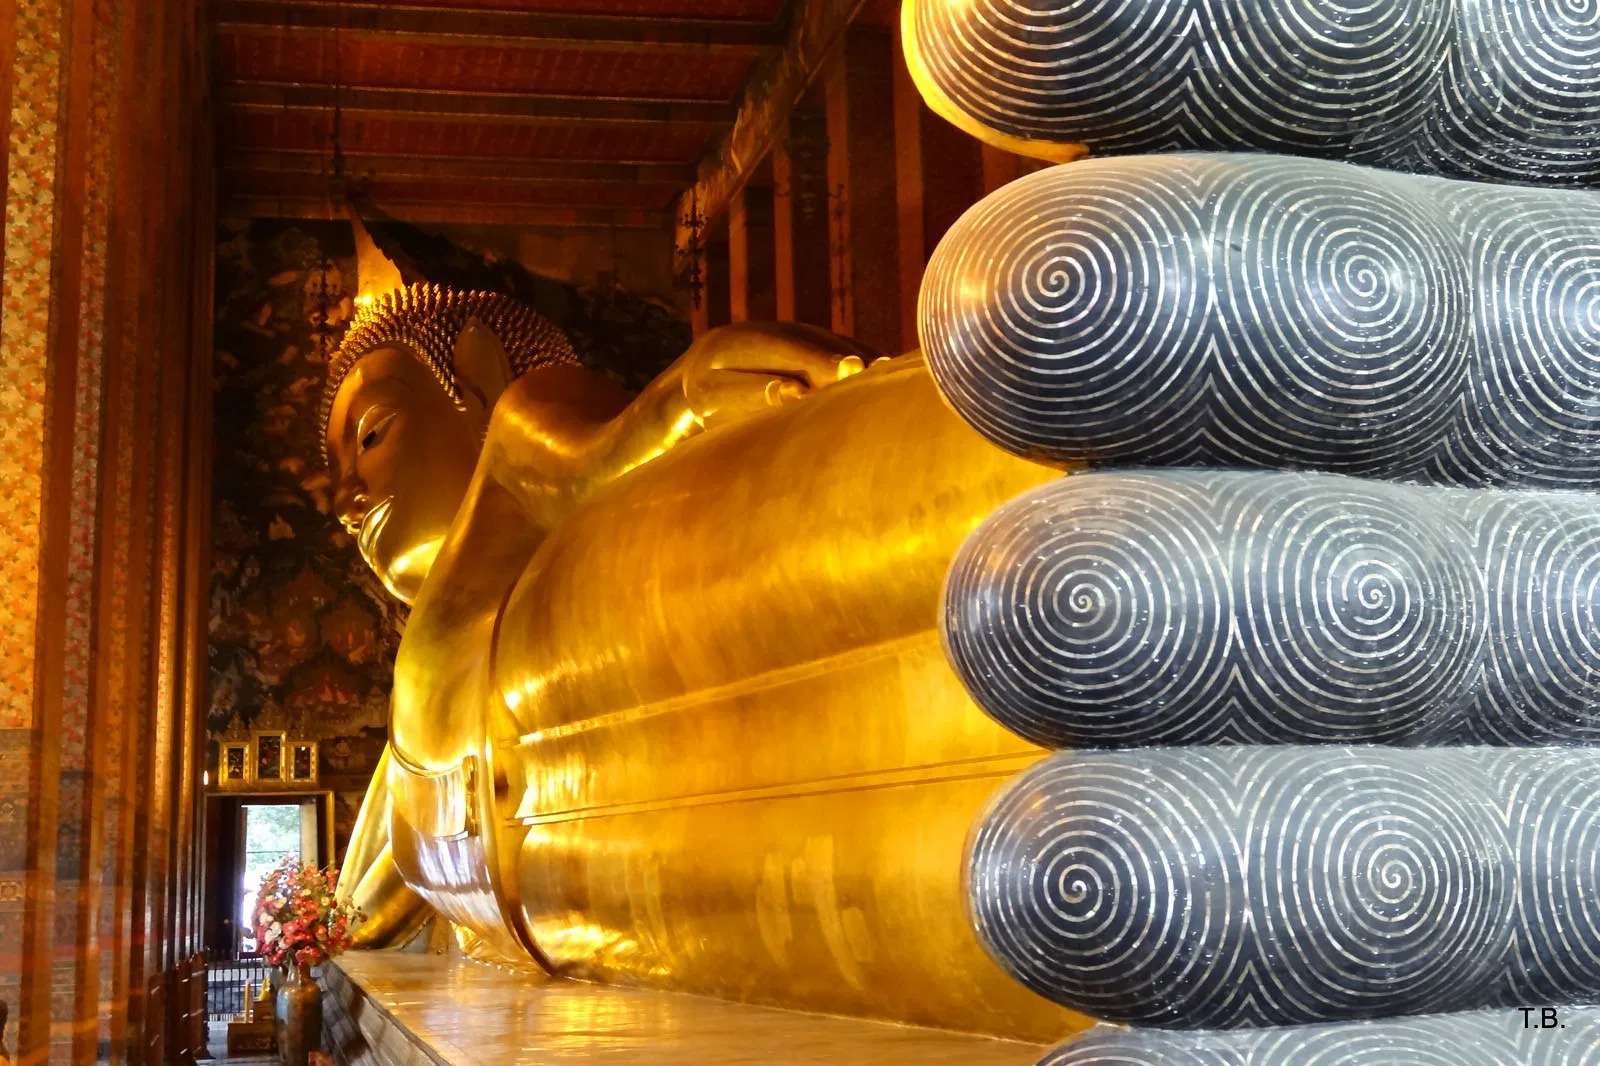 Can You Pass This 40-Question Geography Test That Gets Progressively Harder With Each Question? Wat Pho, Temple of the Reclining Buddha, Bangkok, Thailand